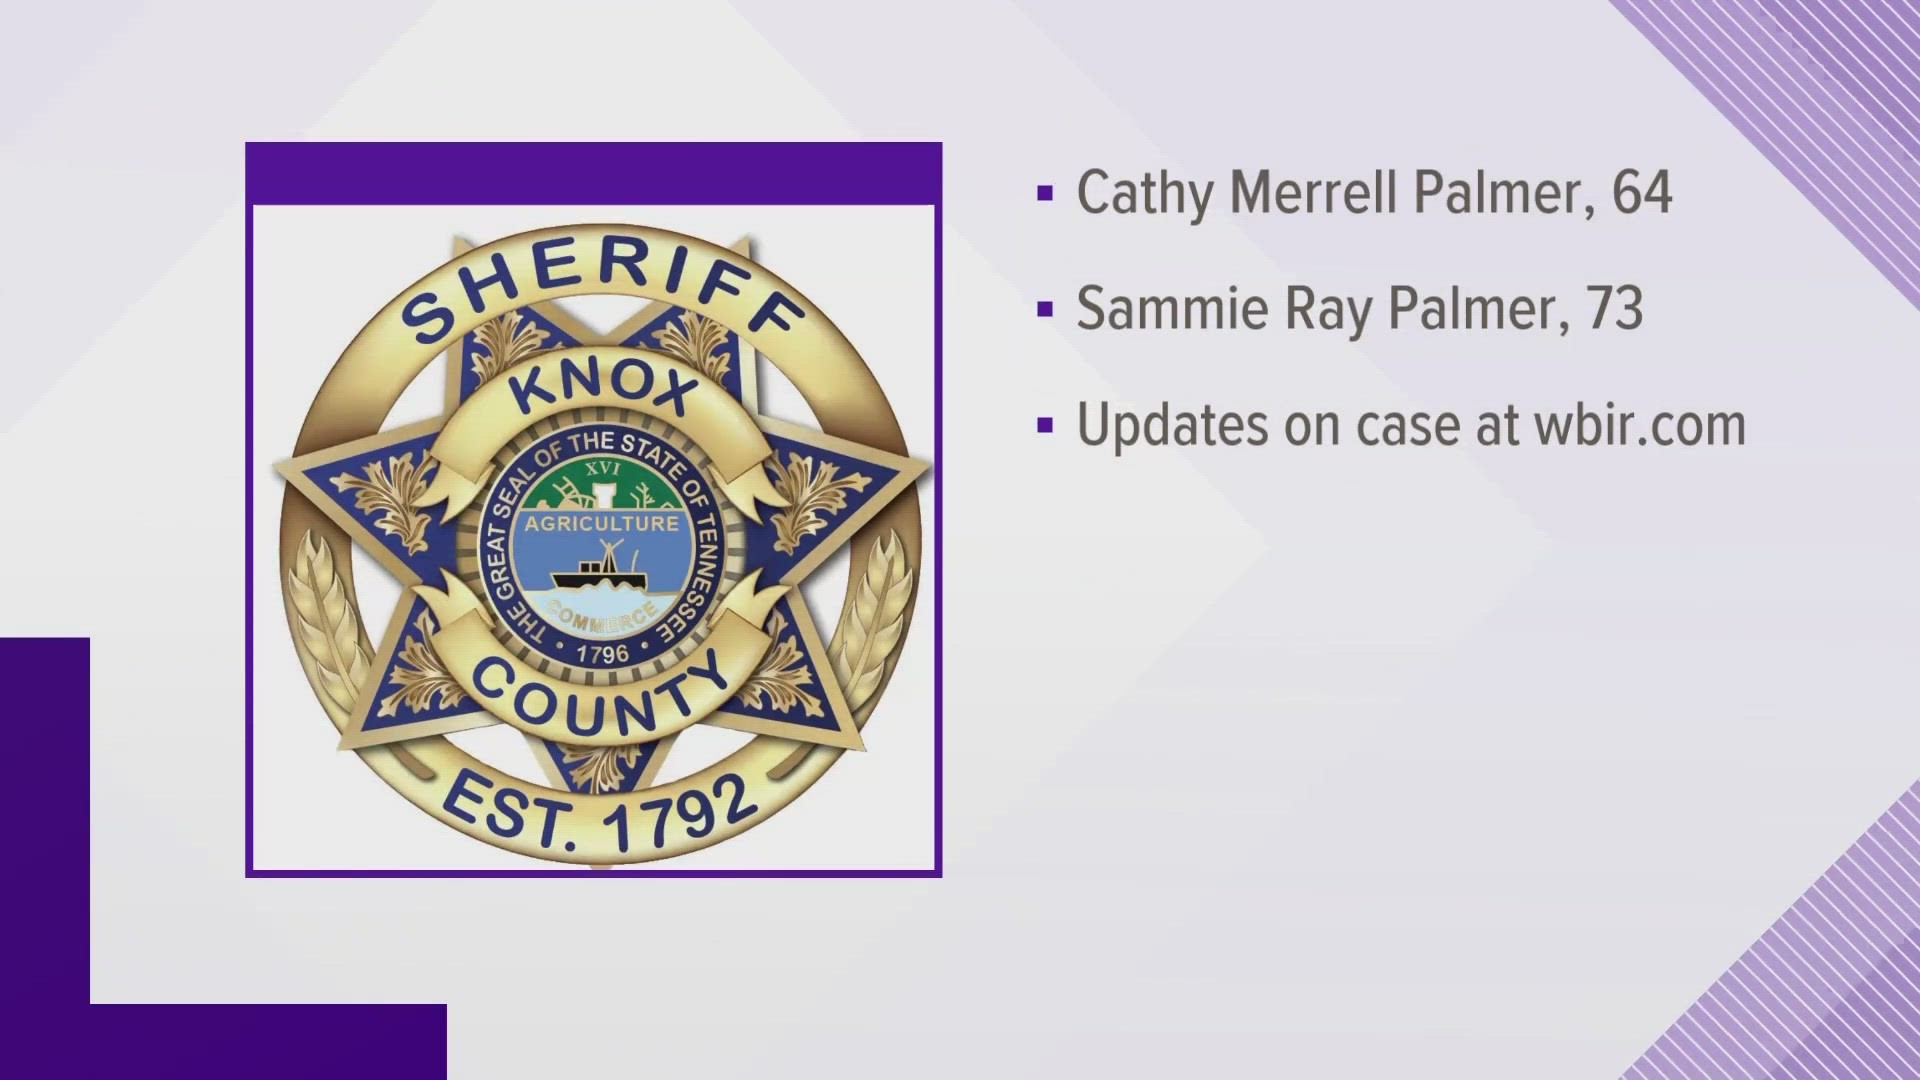 KCSO said the investigation into their deaths is ongoing. Sammie Palmer worked for the Sheriff's Office. Cathy Palmer worked in the Property Assessor's Office.